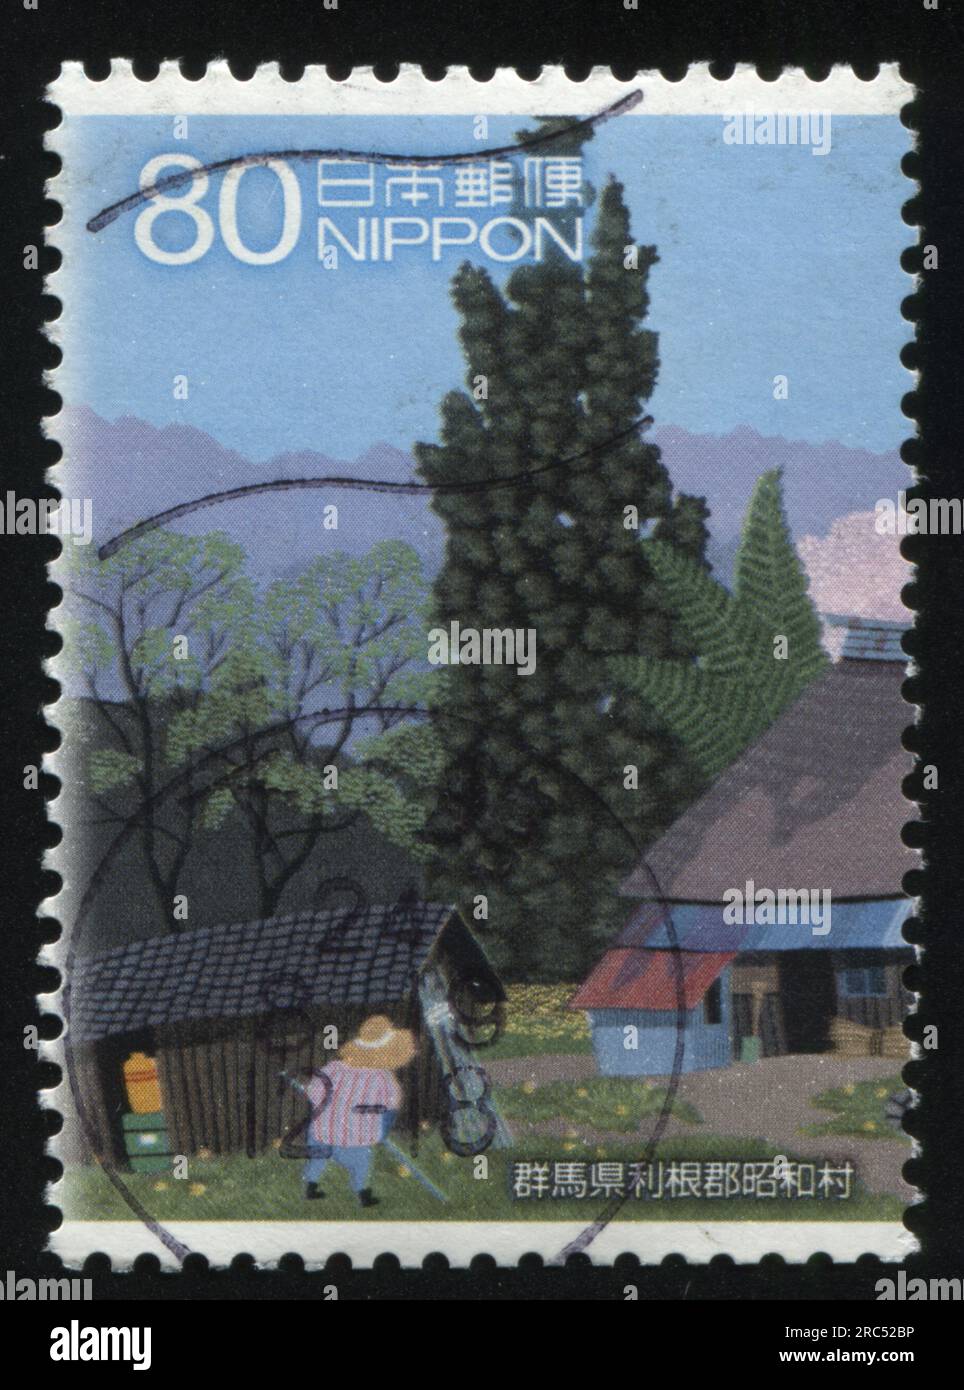 RUSSIA KALININGRAD, 22 APRIL 2016: stamp printed by Japan, shows children playing outdoors on the bank of the river near the wooden houses, circa 2013 Stock Photo